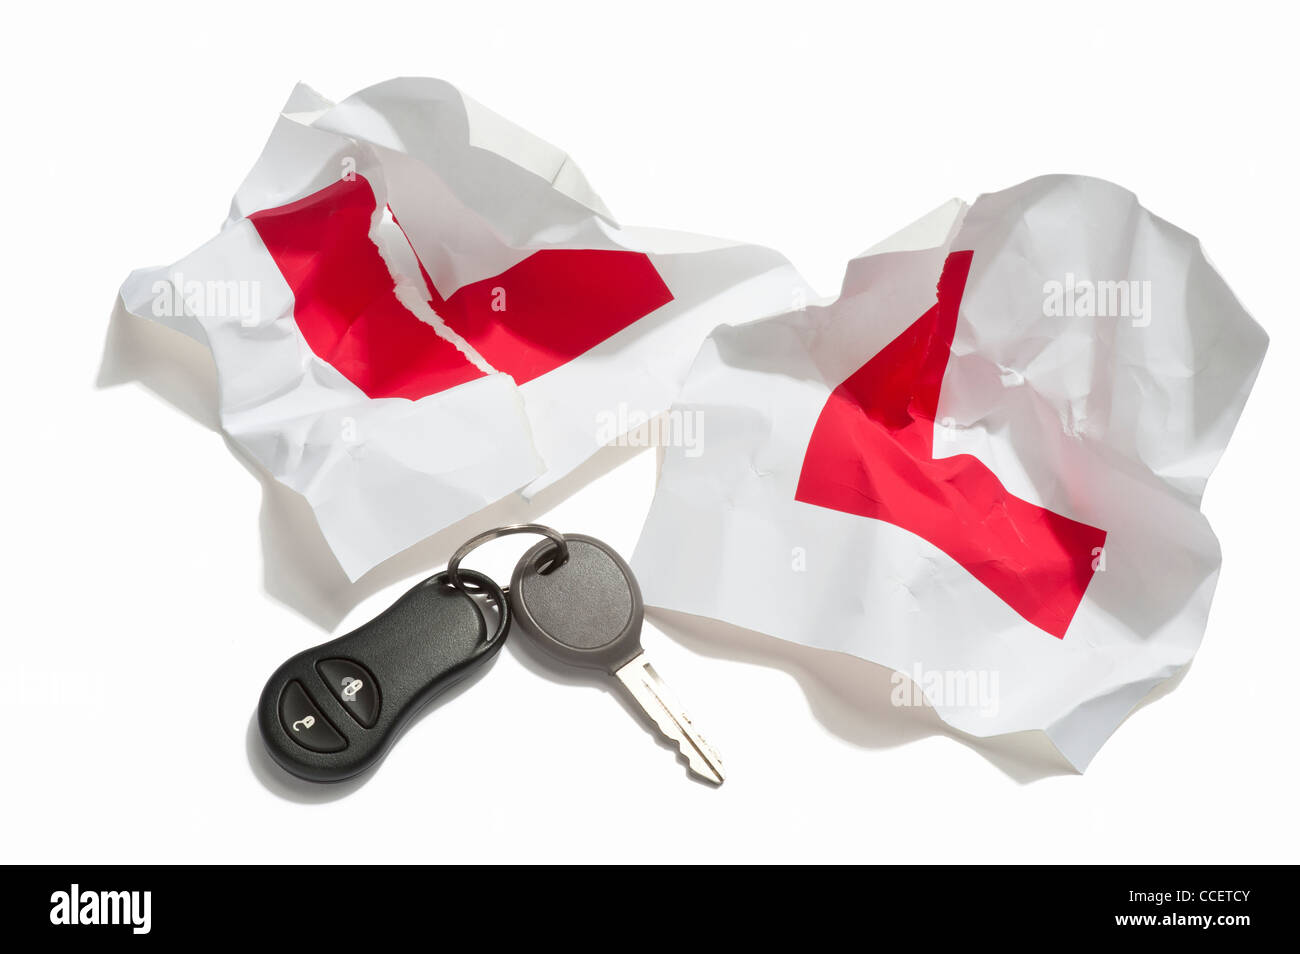 Crumpled L plates with a car key and remote key fob Stock Photo